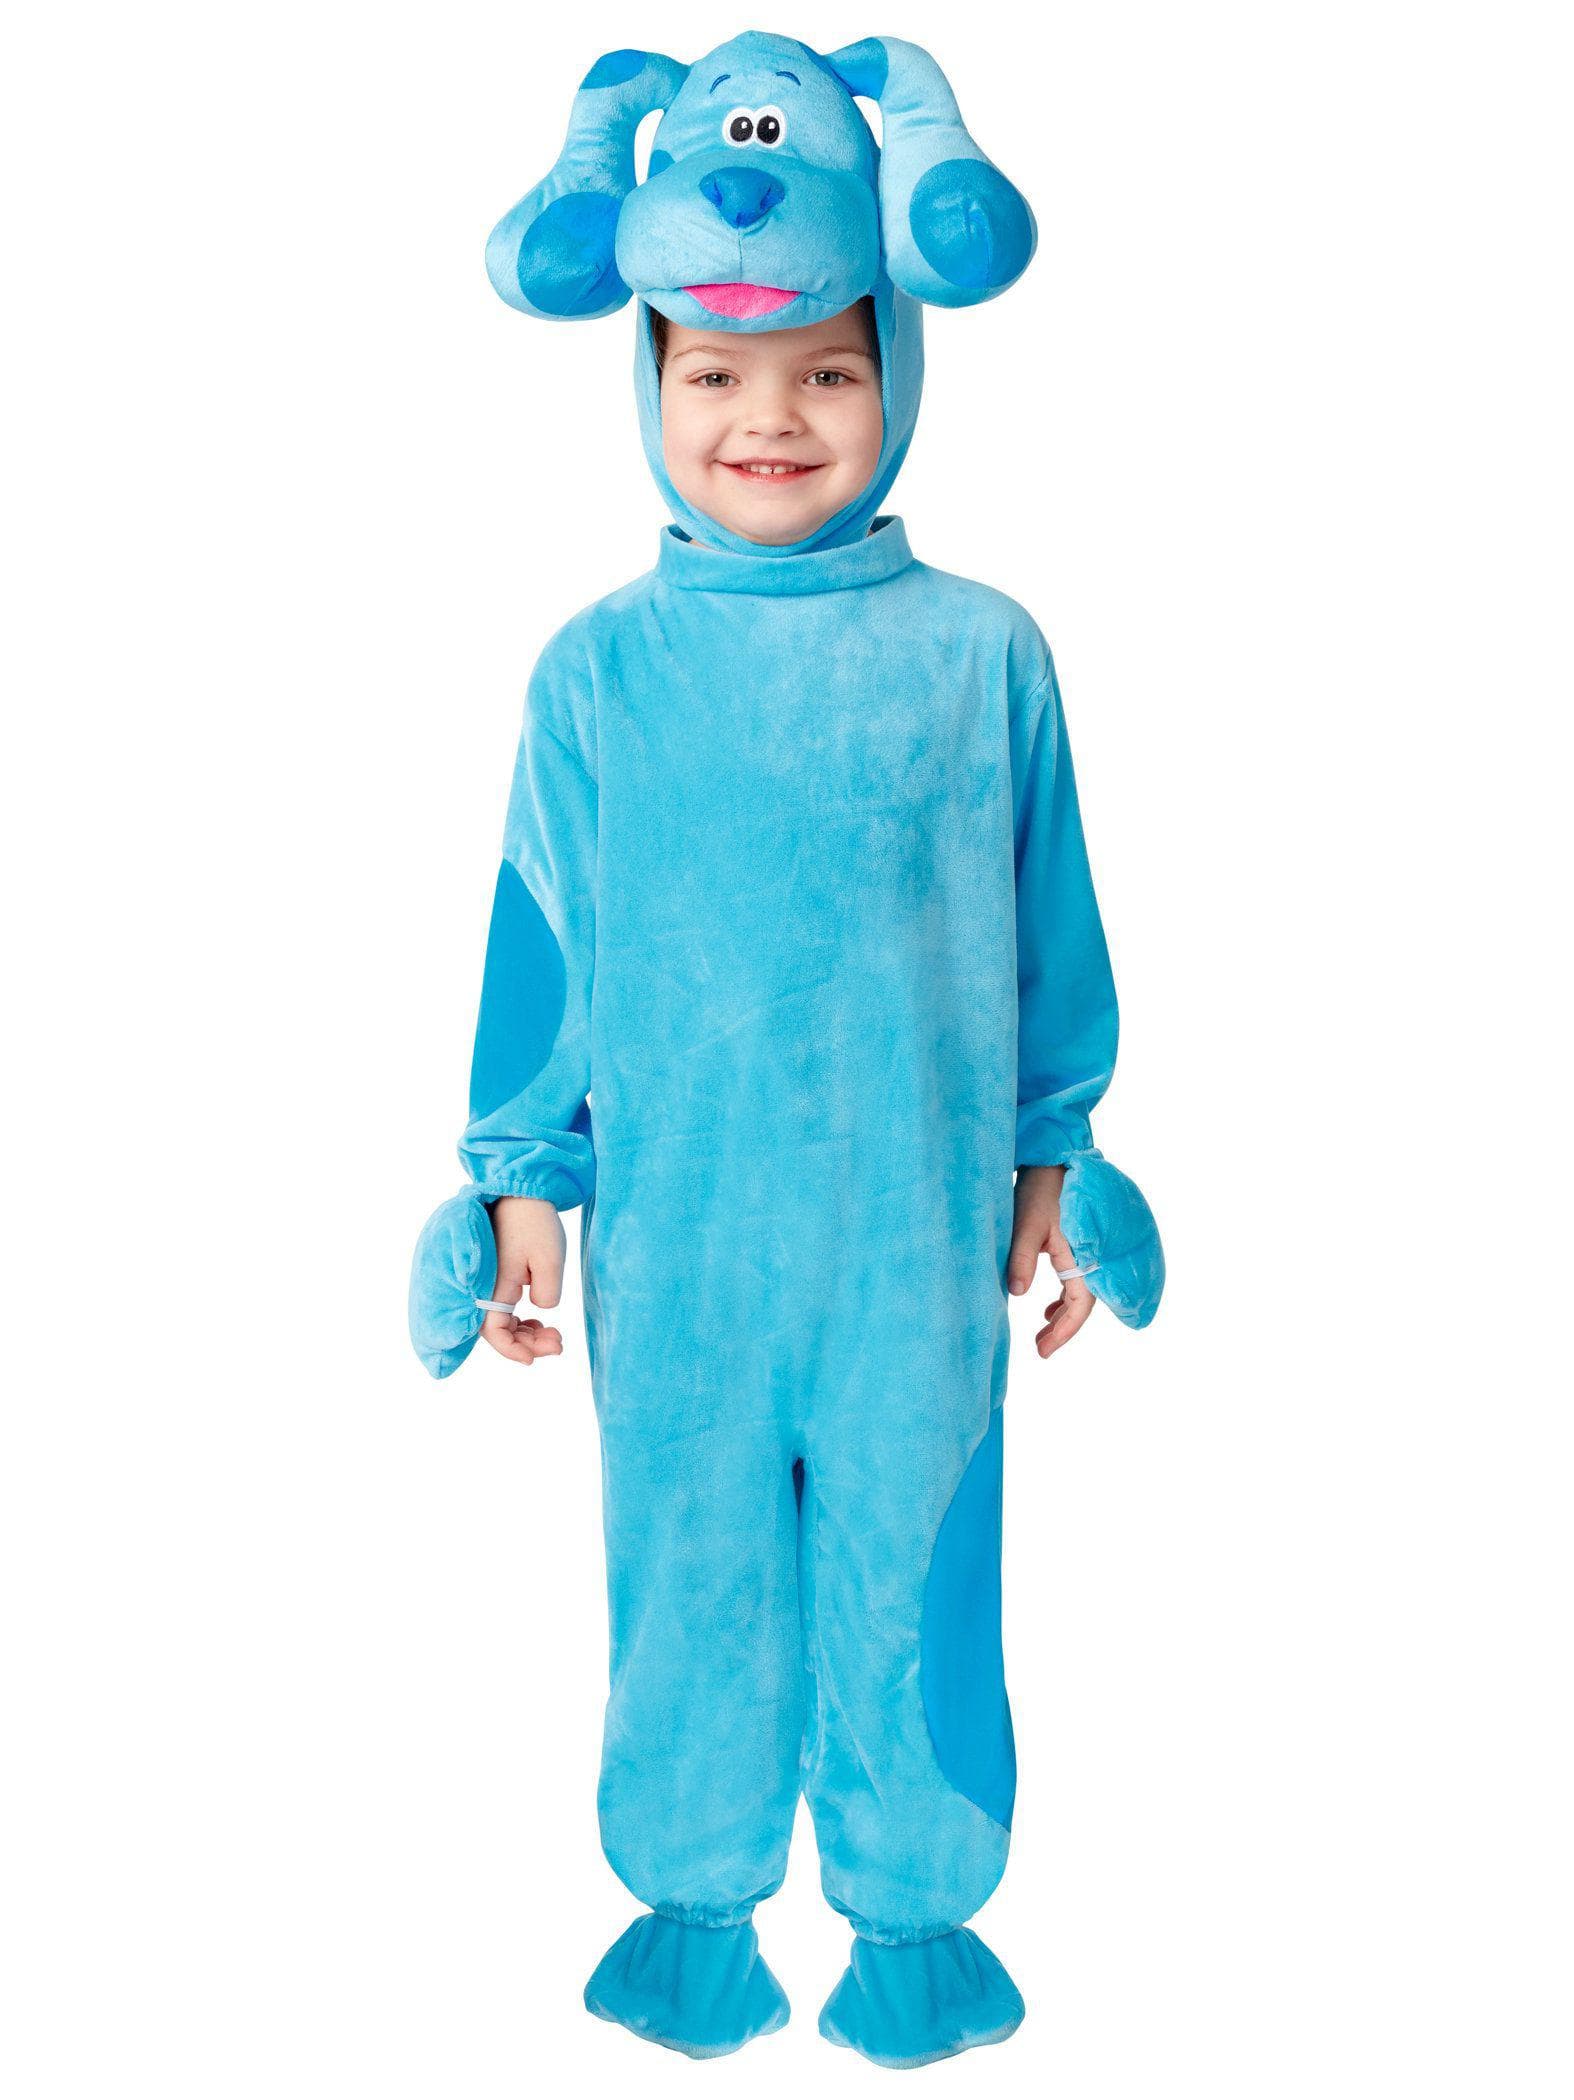 Blue's Clues Blue Jumpsuit and Headpiece for Toddlers - costumes.com